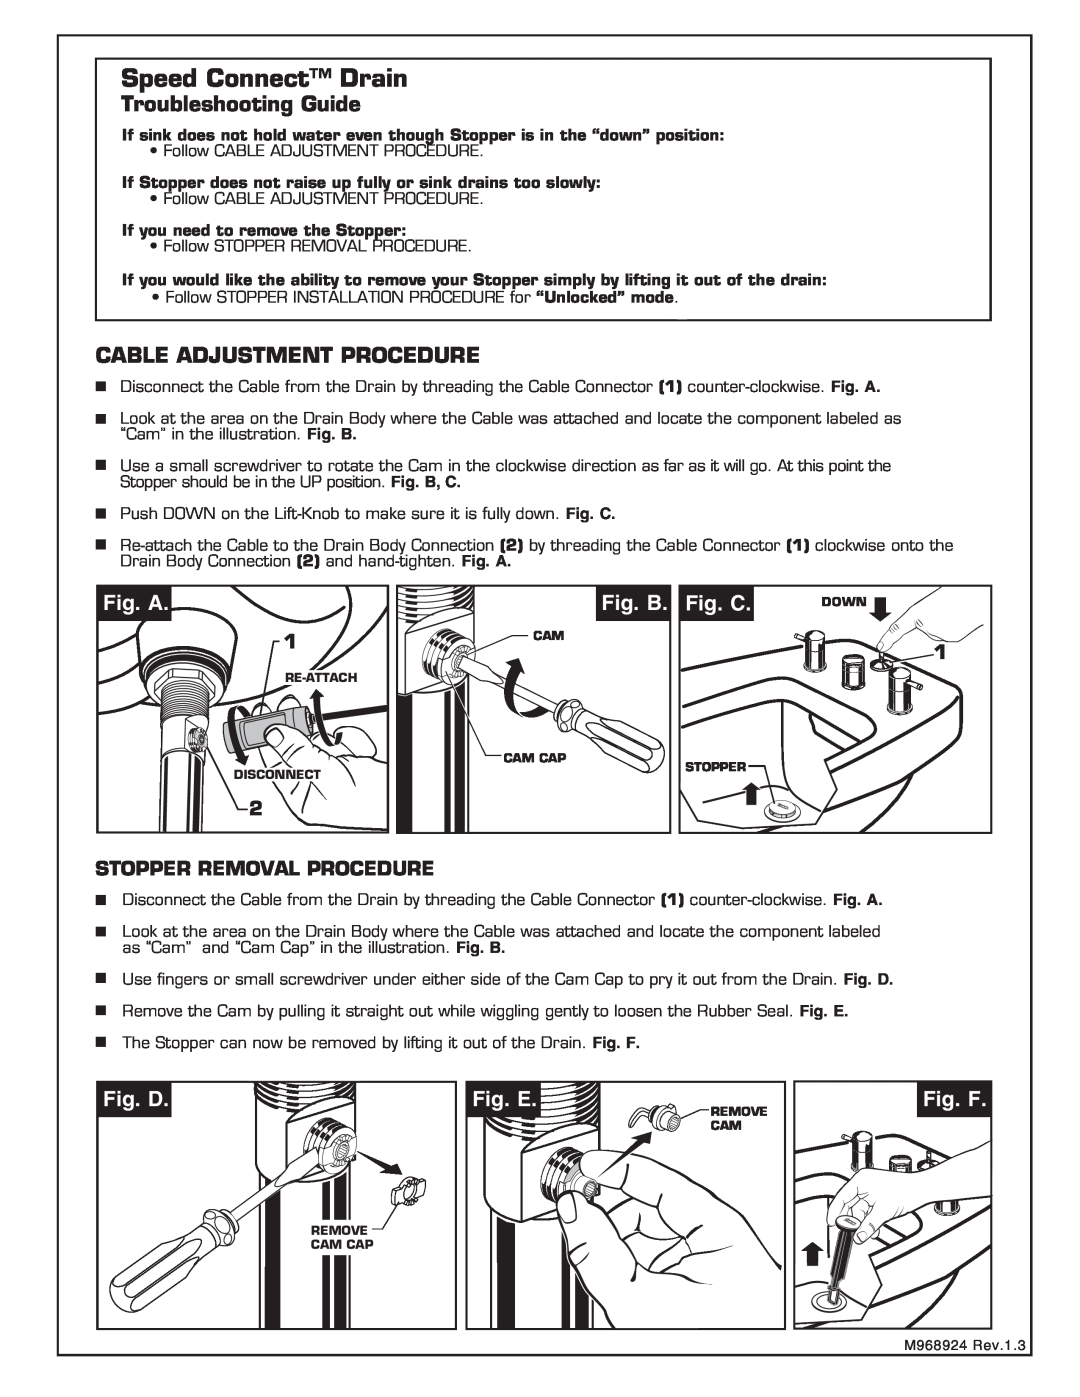 American Standard 2064.4 Troubleshooting Guide, Cable Adjustment Procedure, Fig. A, Fig. B, Fig. C, Fig. D, Fig. E, Fig. F 